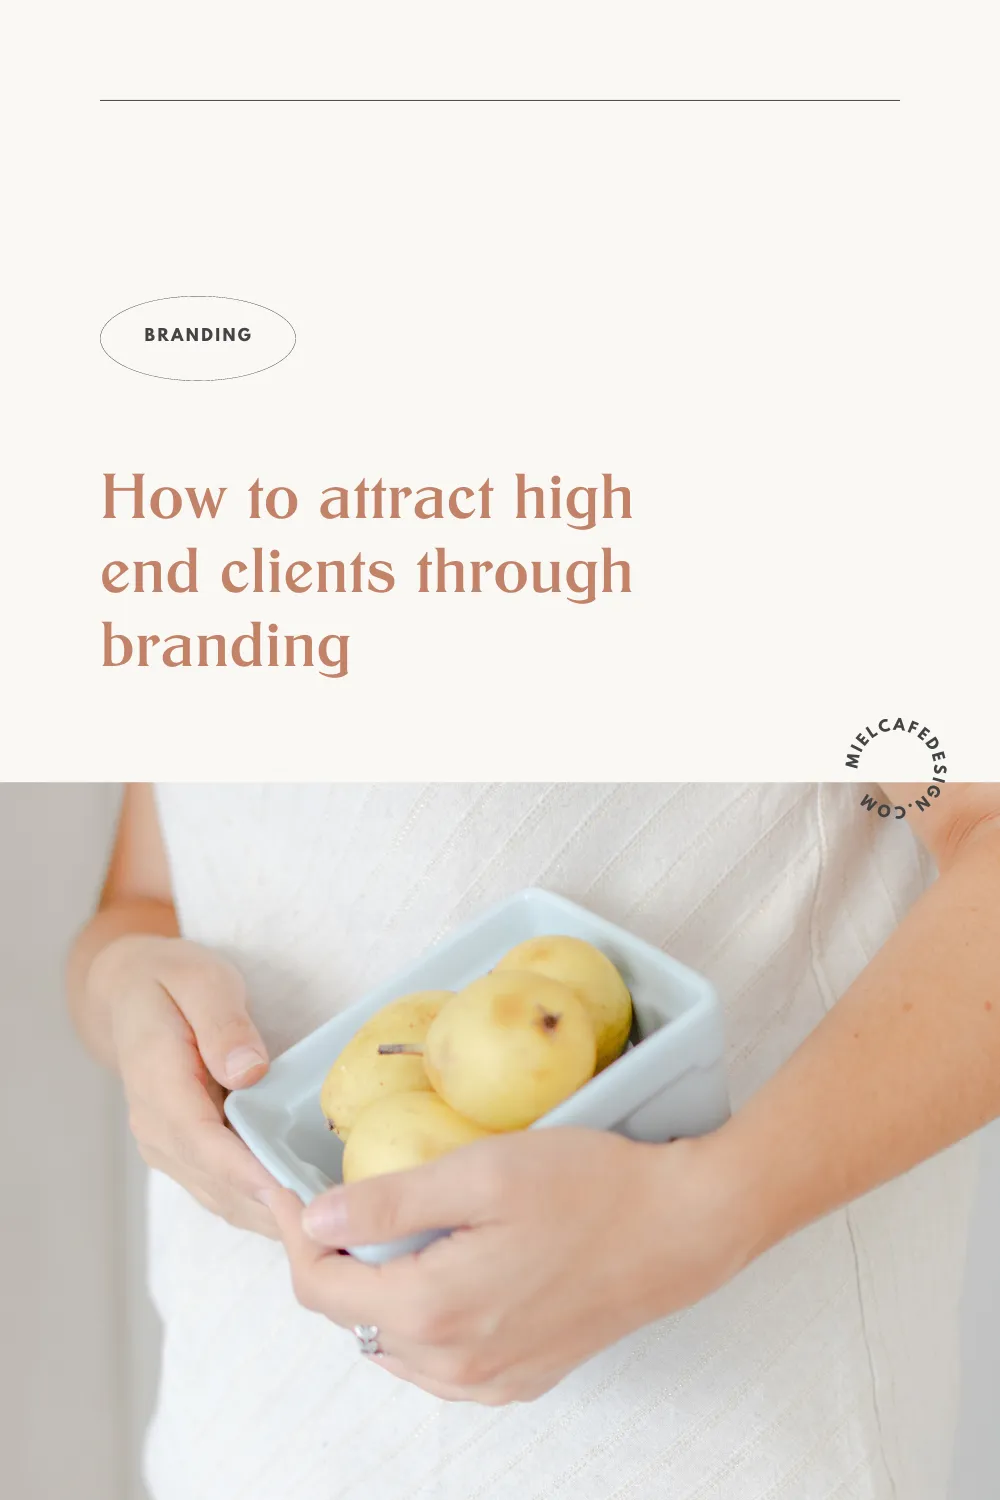 How to attract high end clients through branding